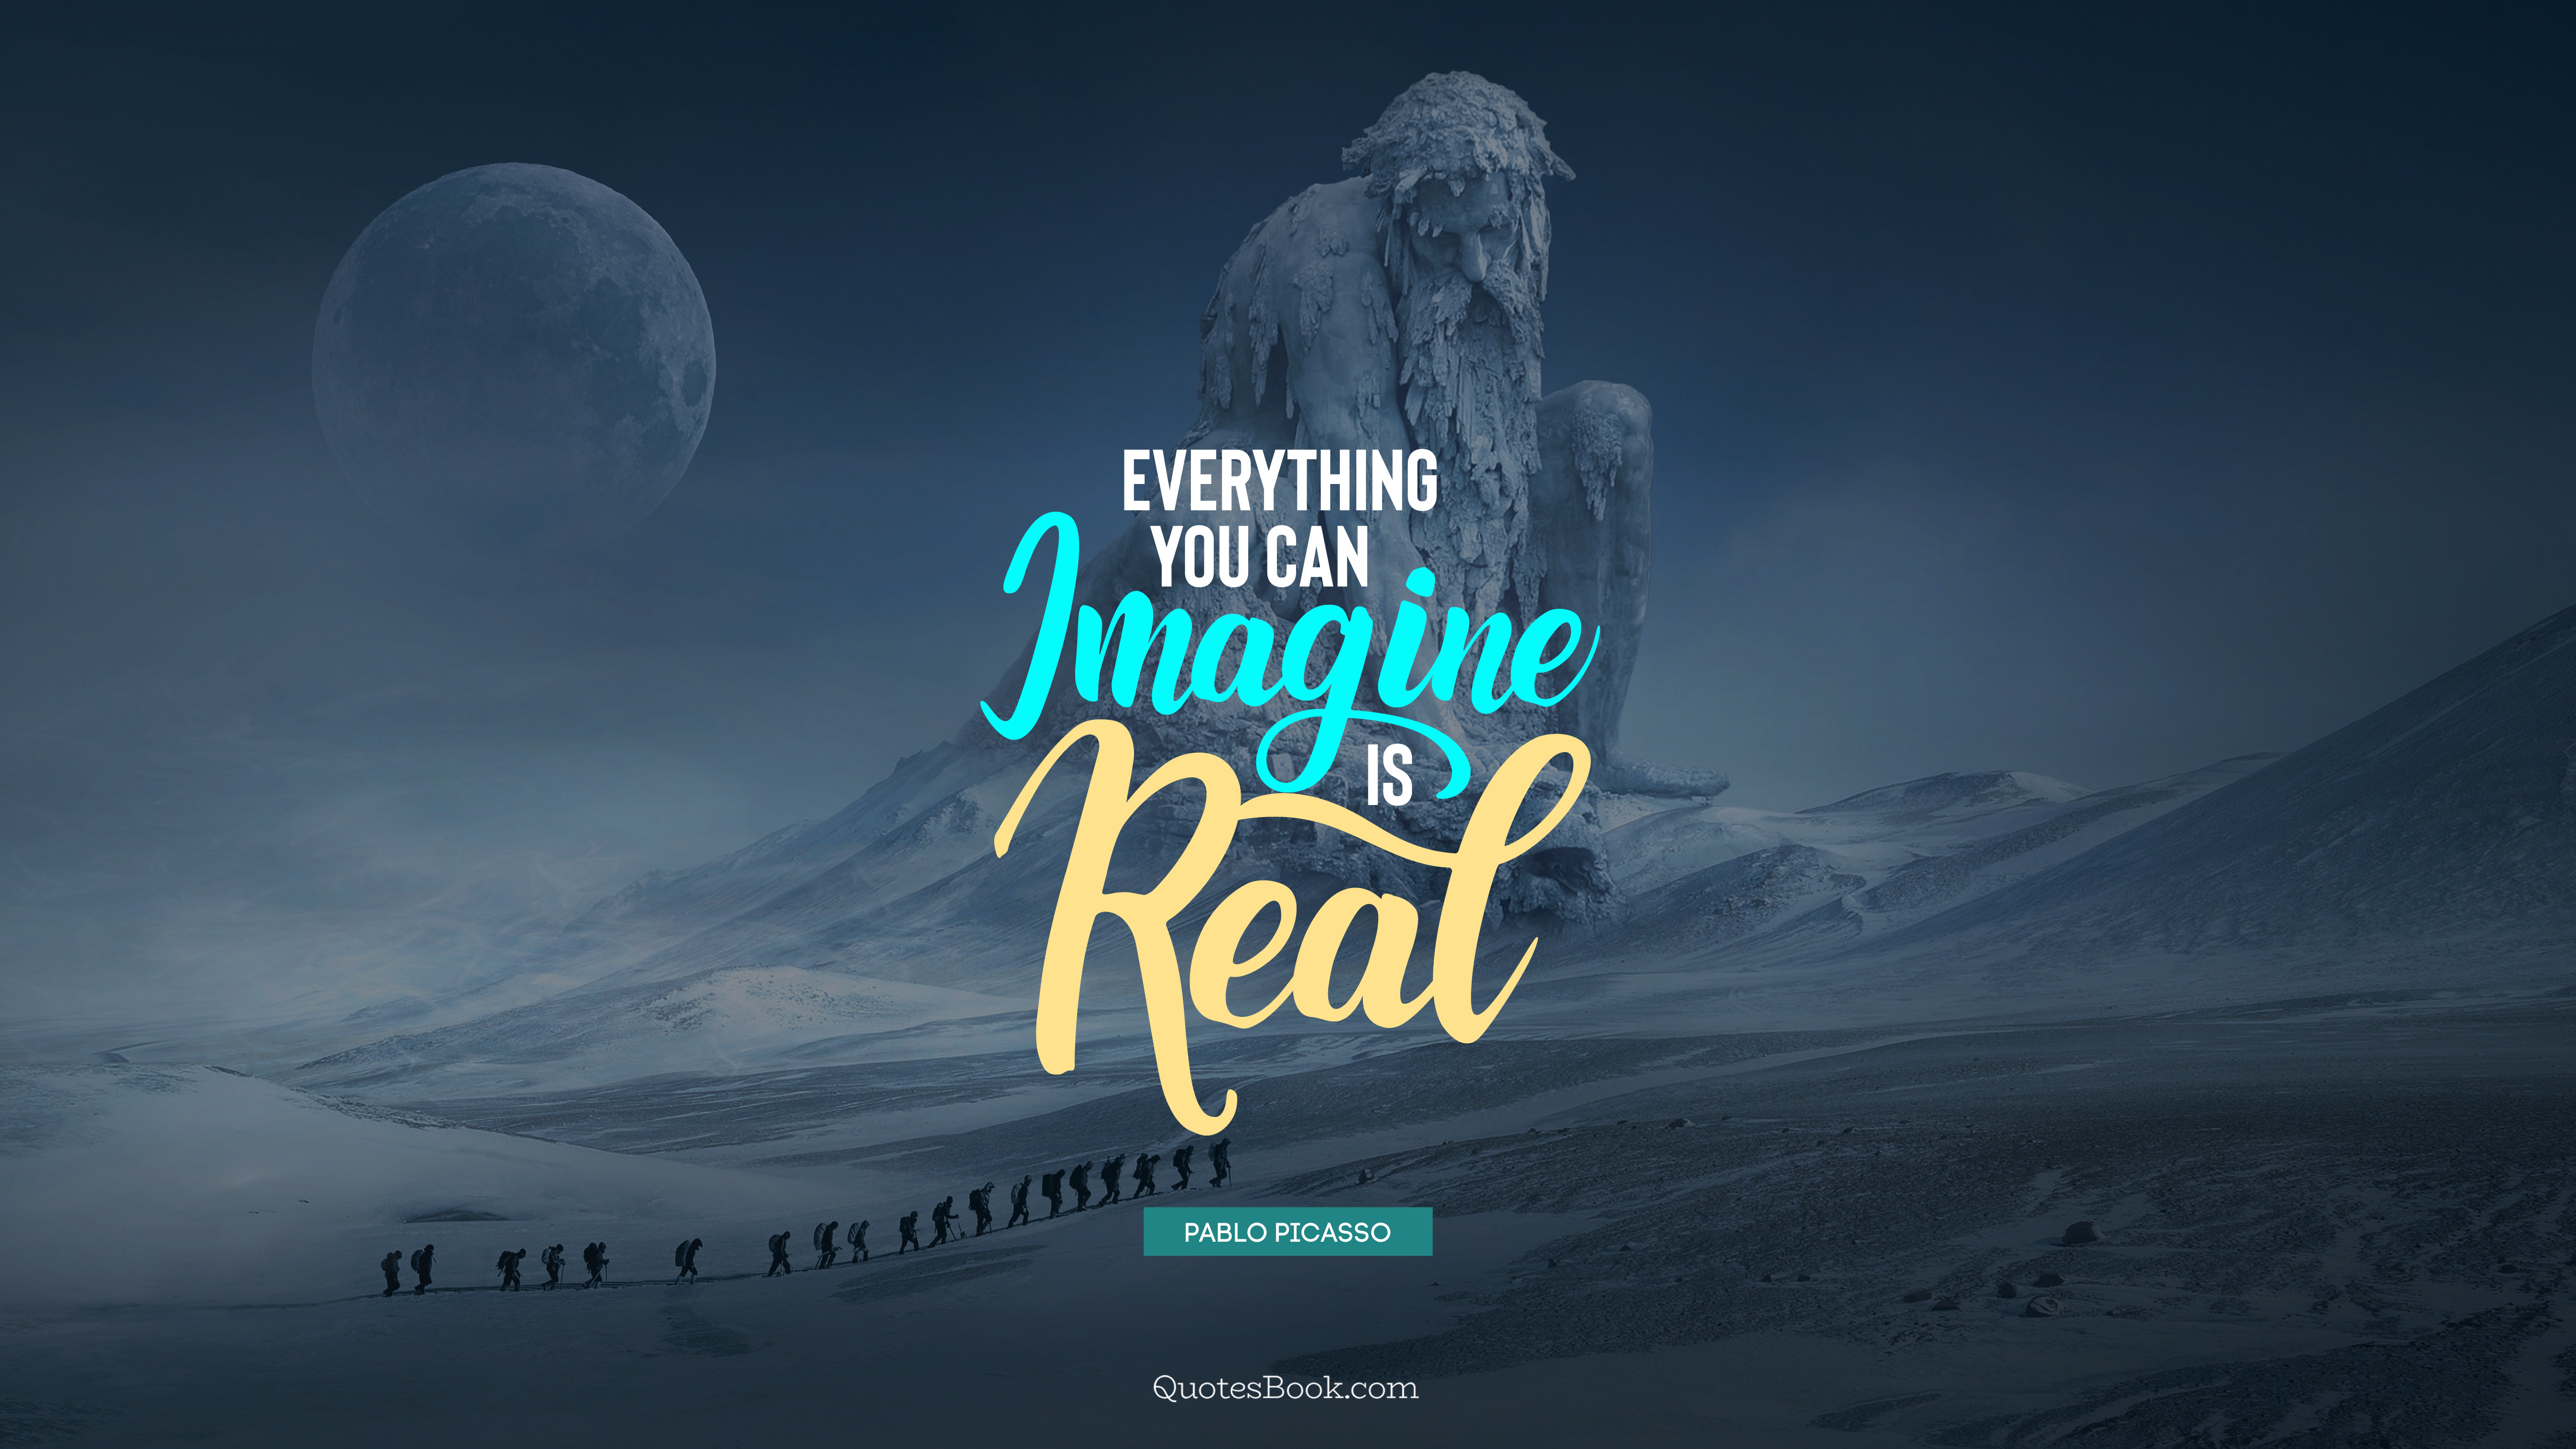 Real everything. Everything you can imagine is real. Everything you can imagine. You can everything. Everything you can imagine is real Picasso.